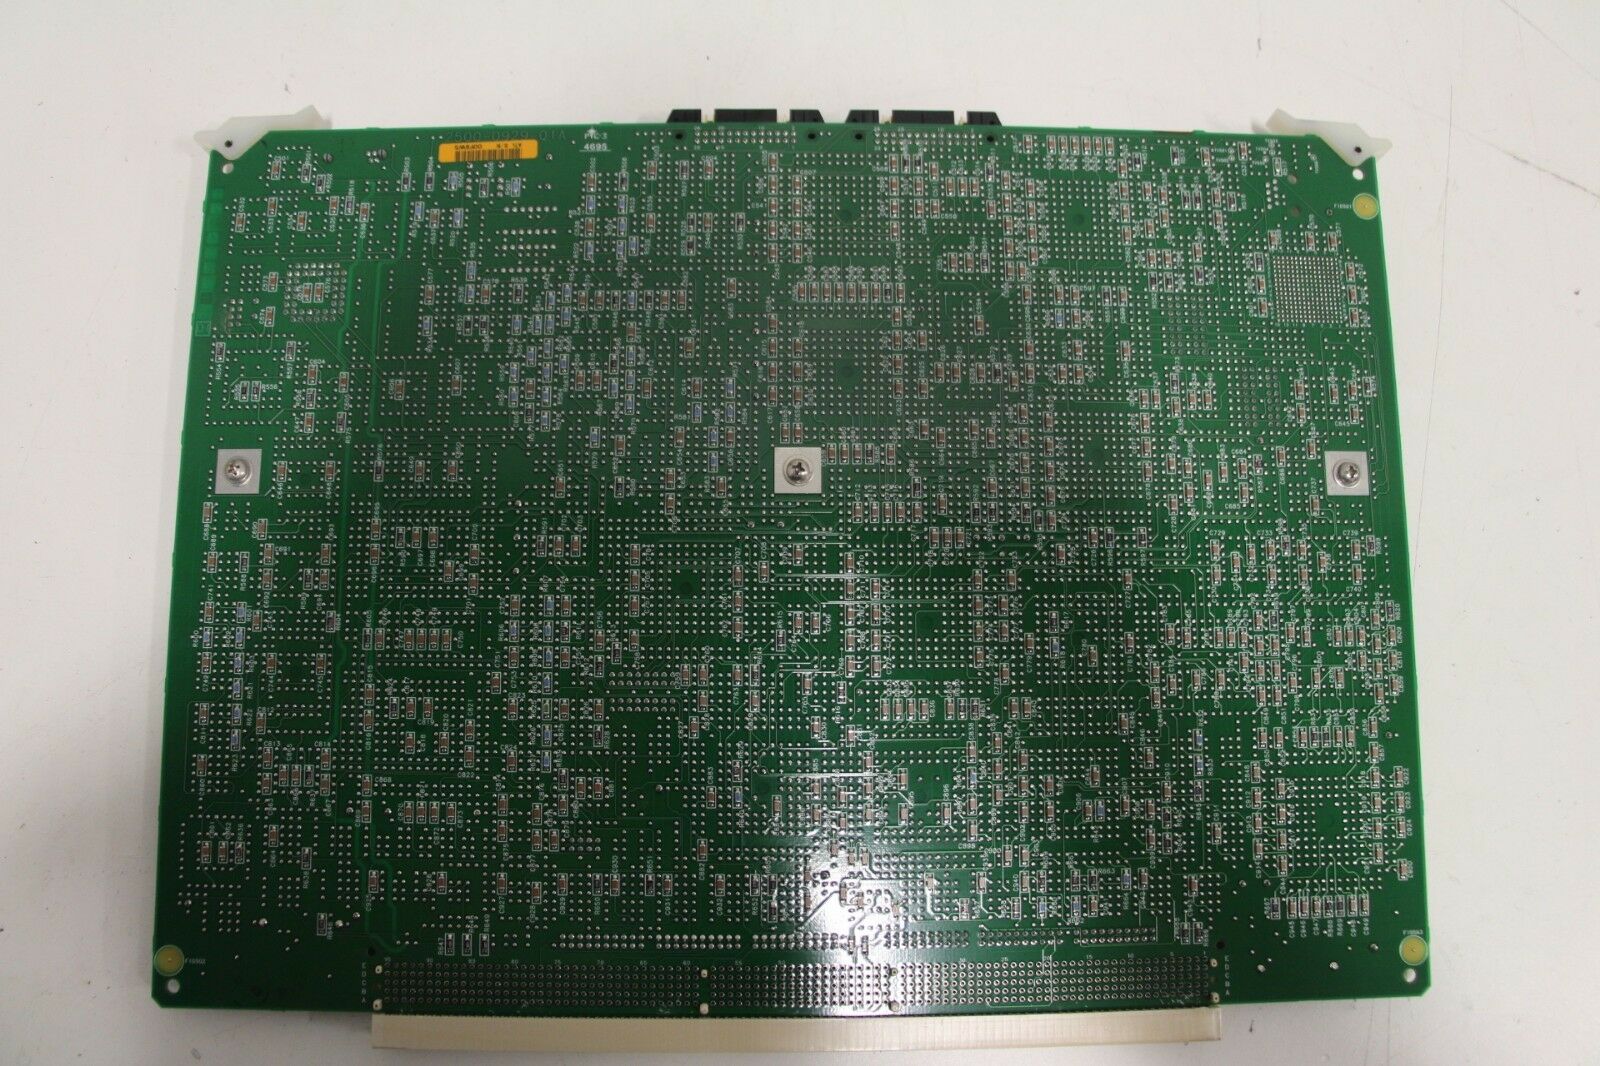 Philips ATL HDI-3000 Ultrasound AIFOM PCB ASSY 7500-0965-05 2500-0929-01A DIAGNOSTIC ULTRASOUND MACHINES FOR SALE